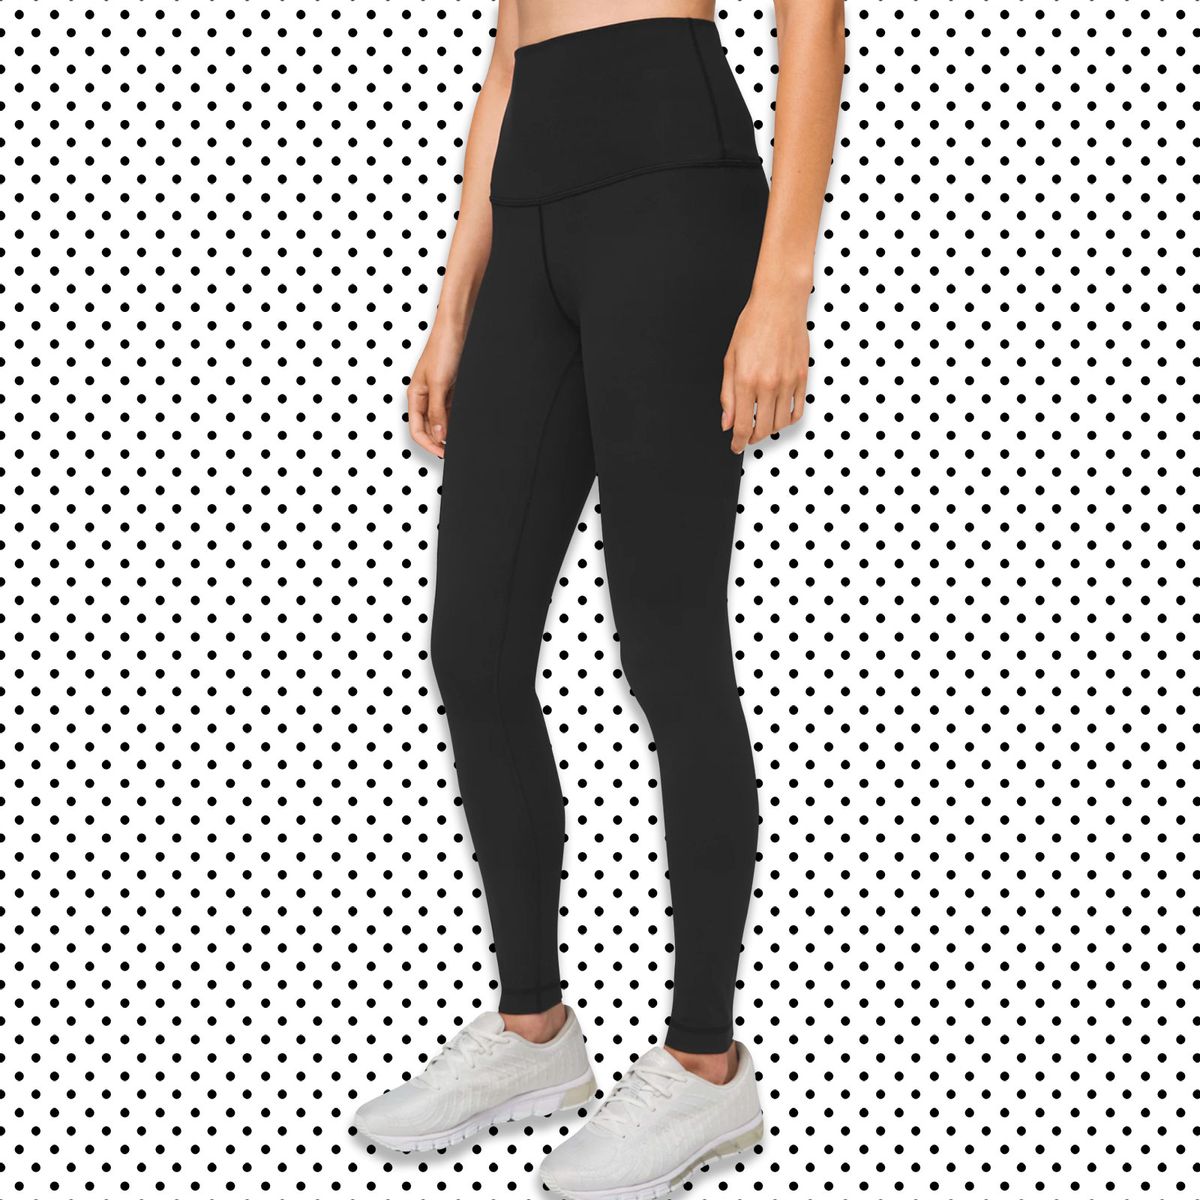 best workout tights for big thighs